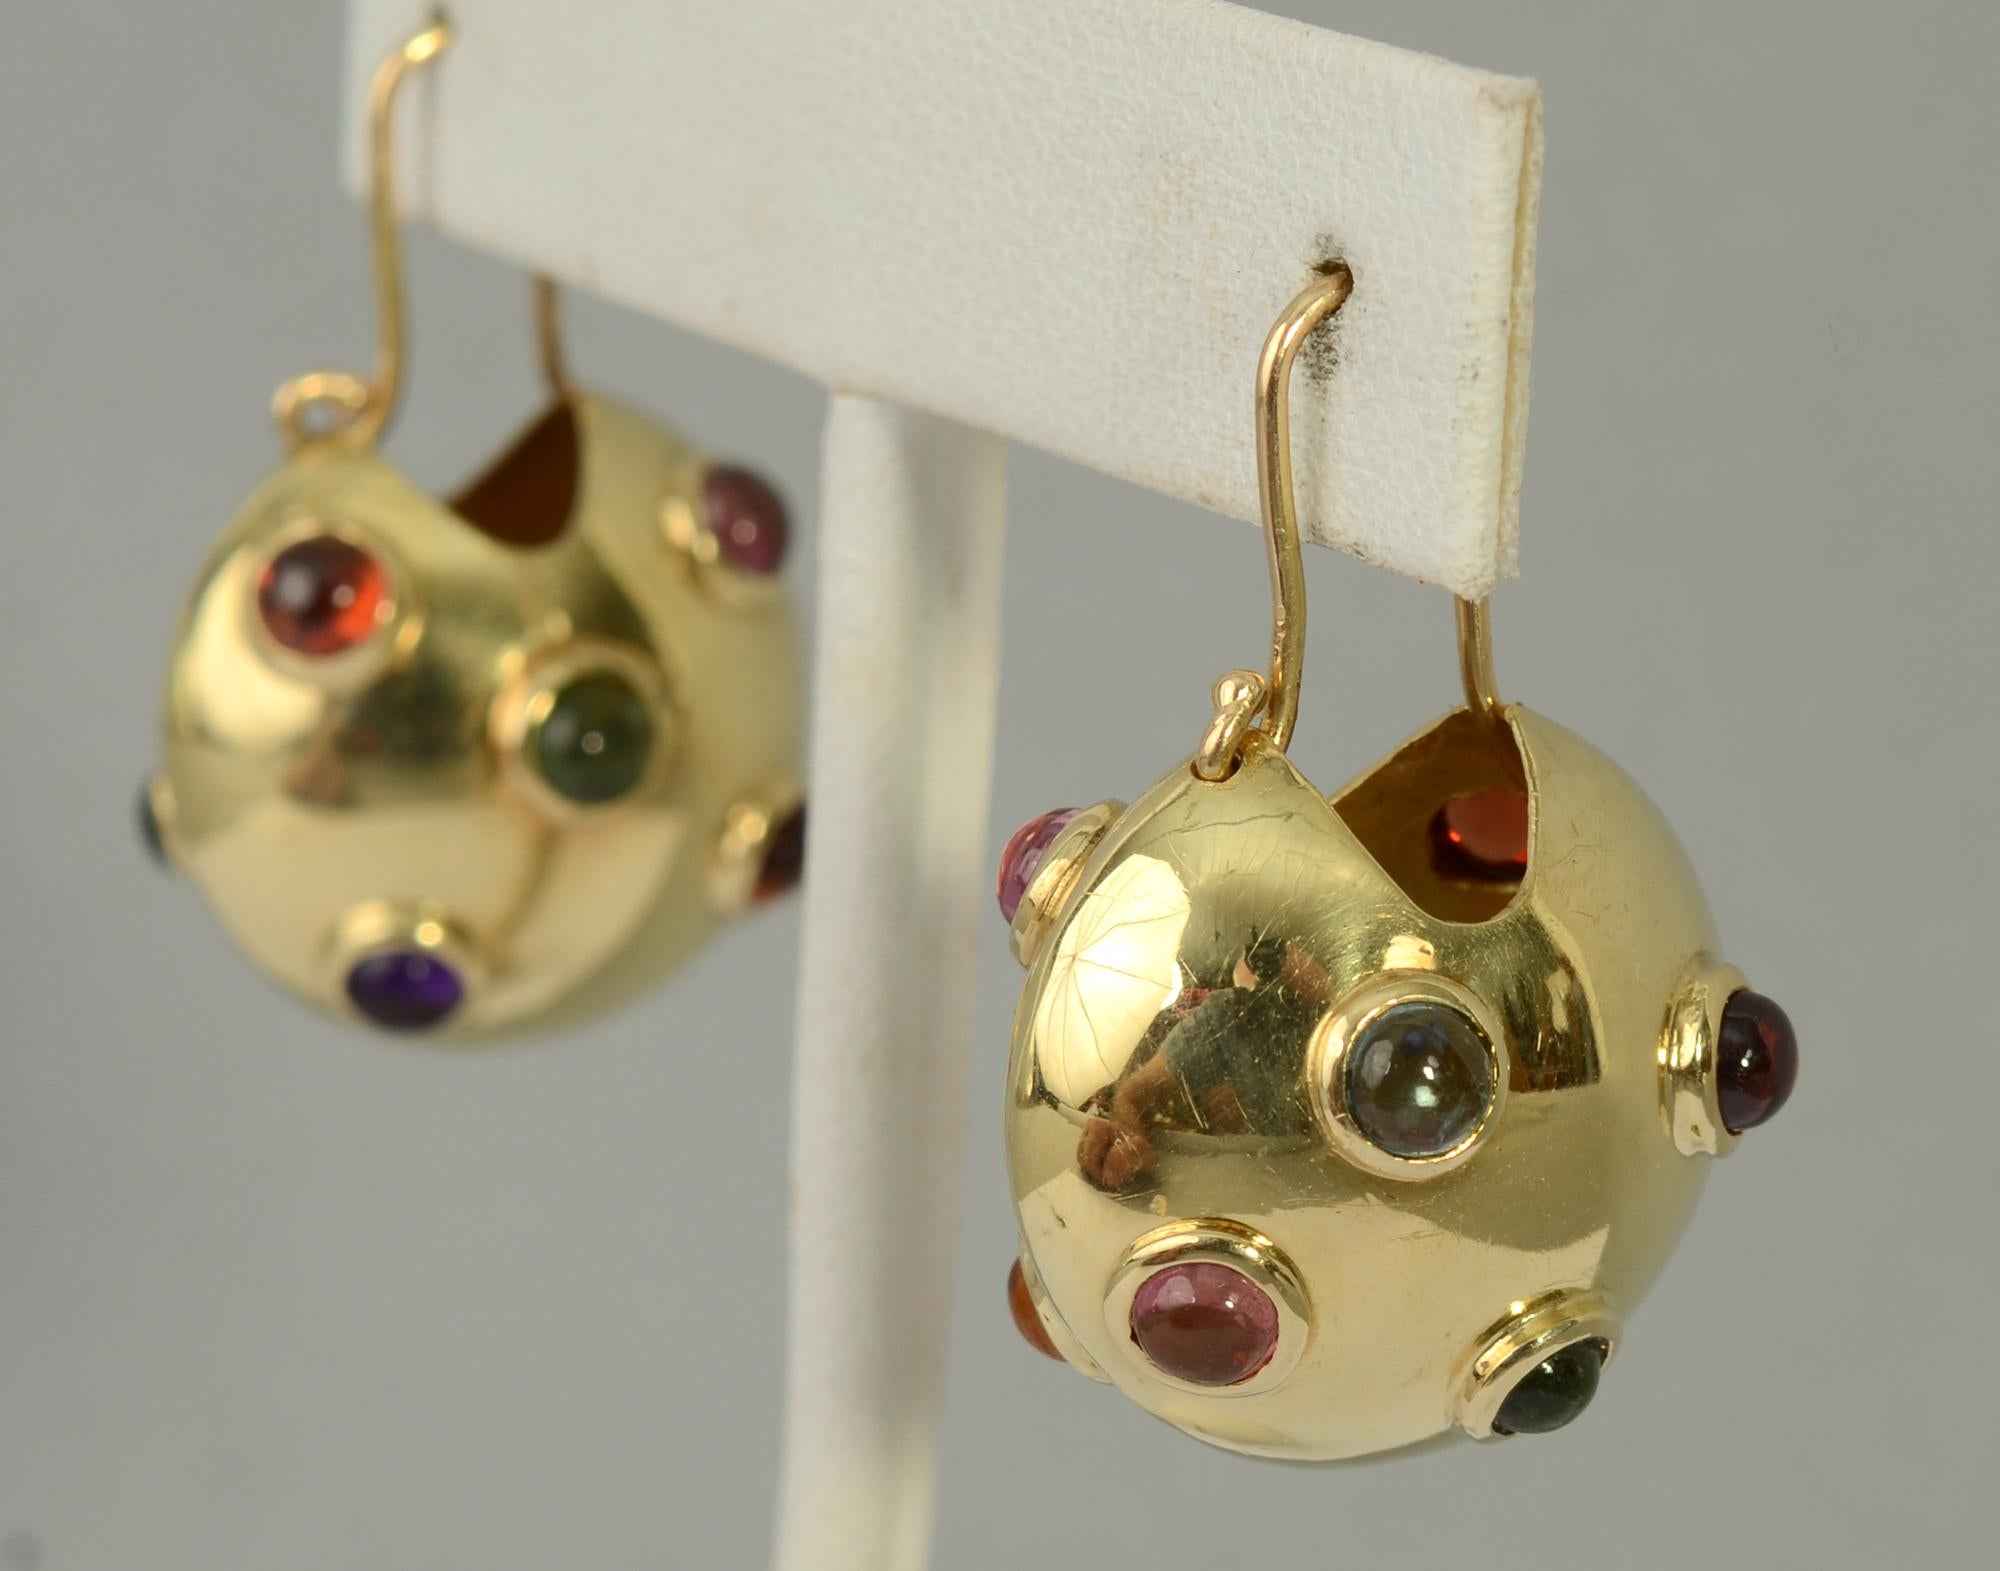 These multi-stone round earrings are reminiscent of the 